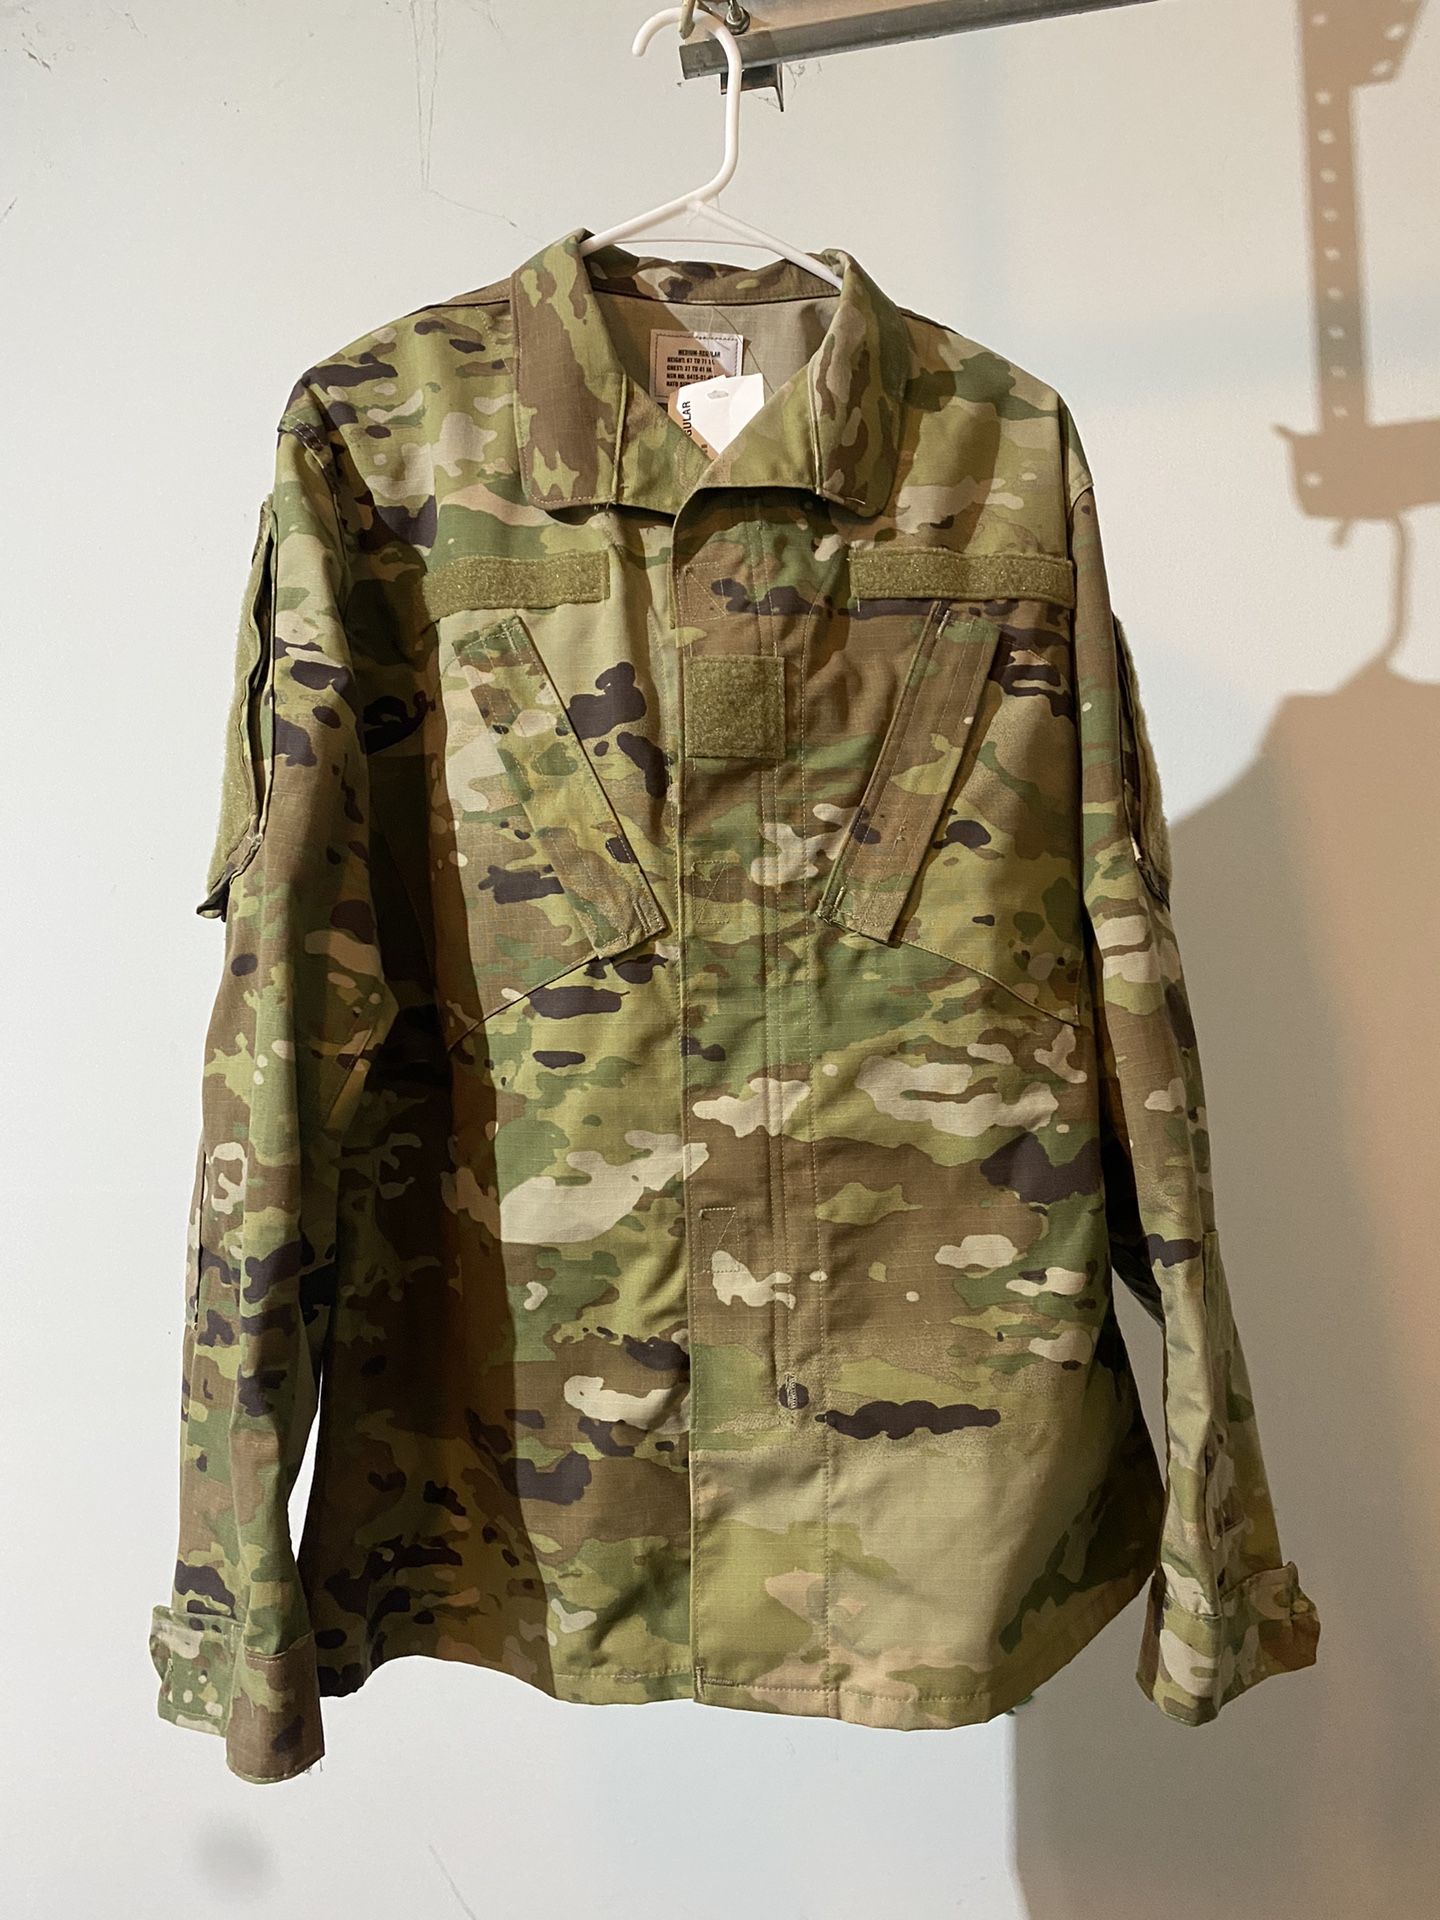 ARMY UNIFORM (Jacket And Bottoms)